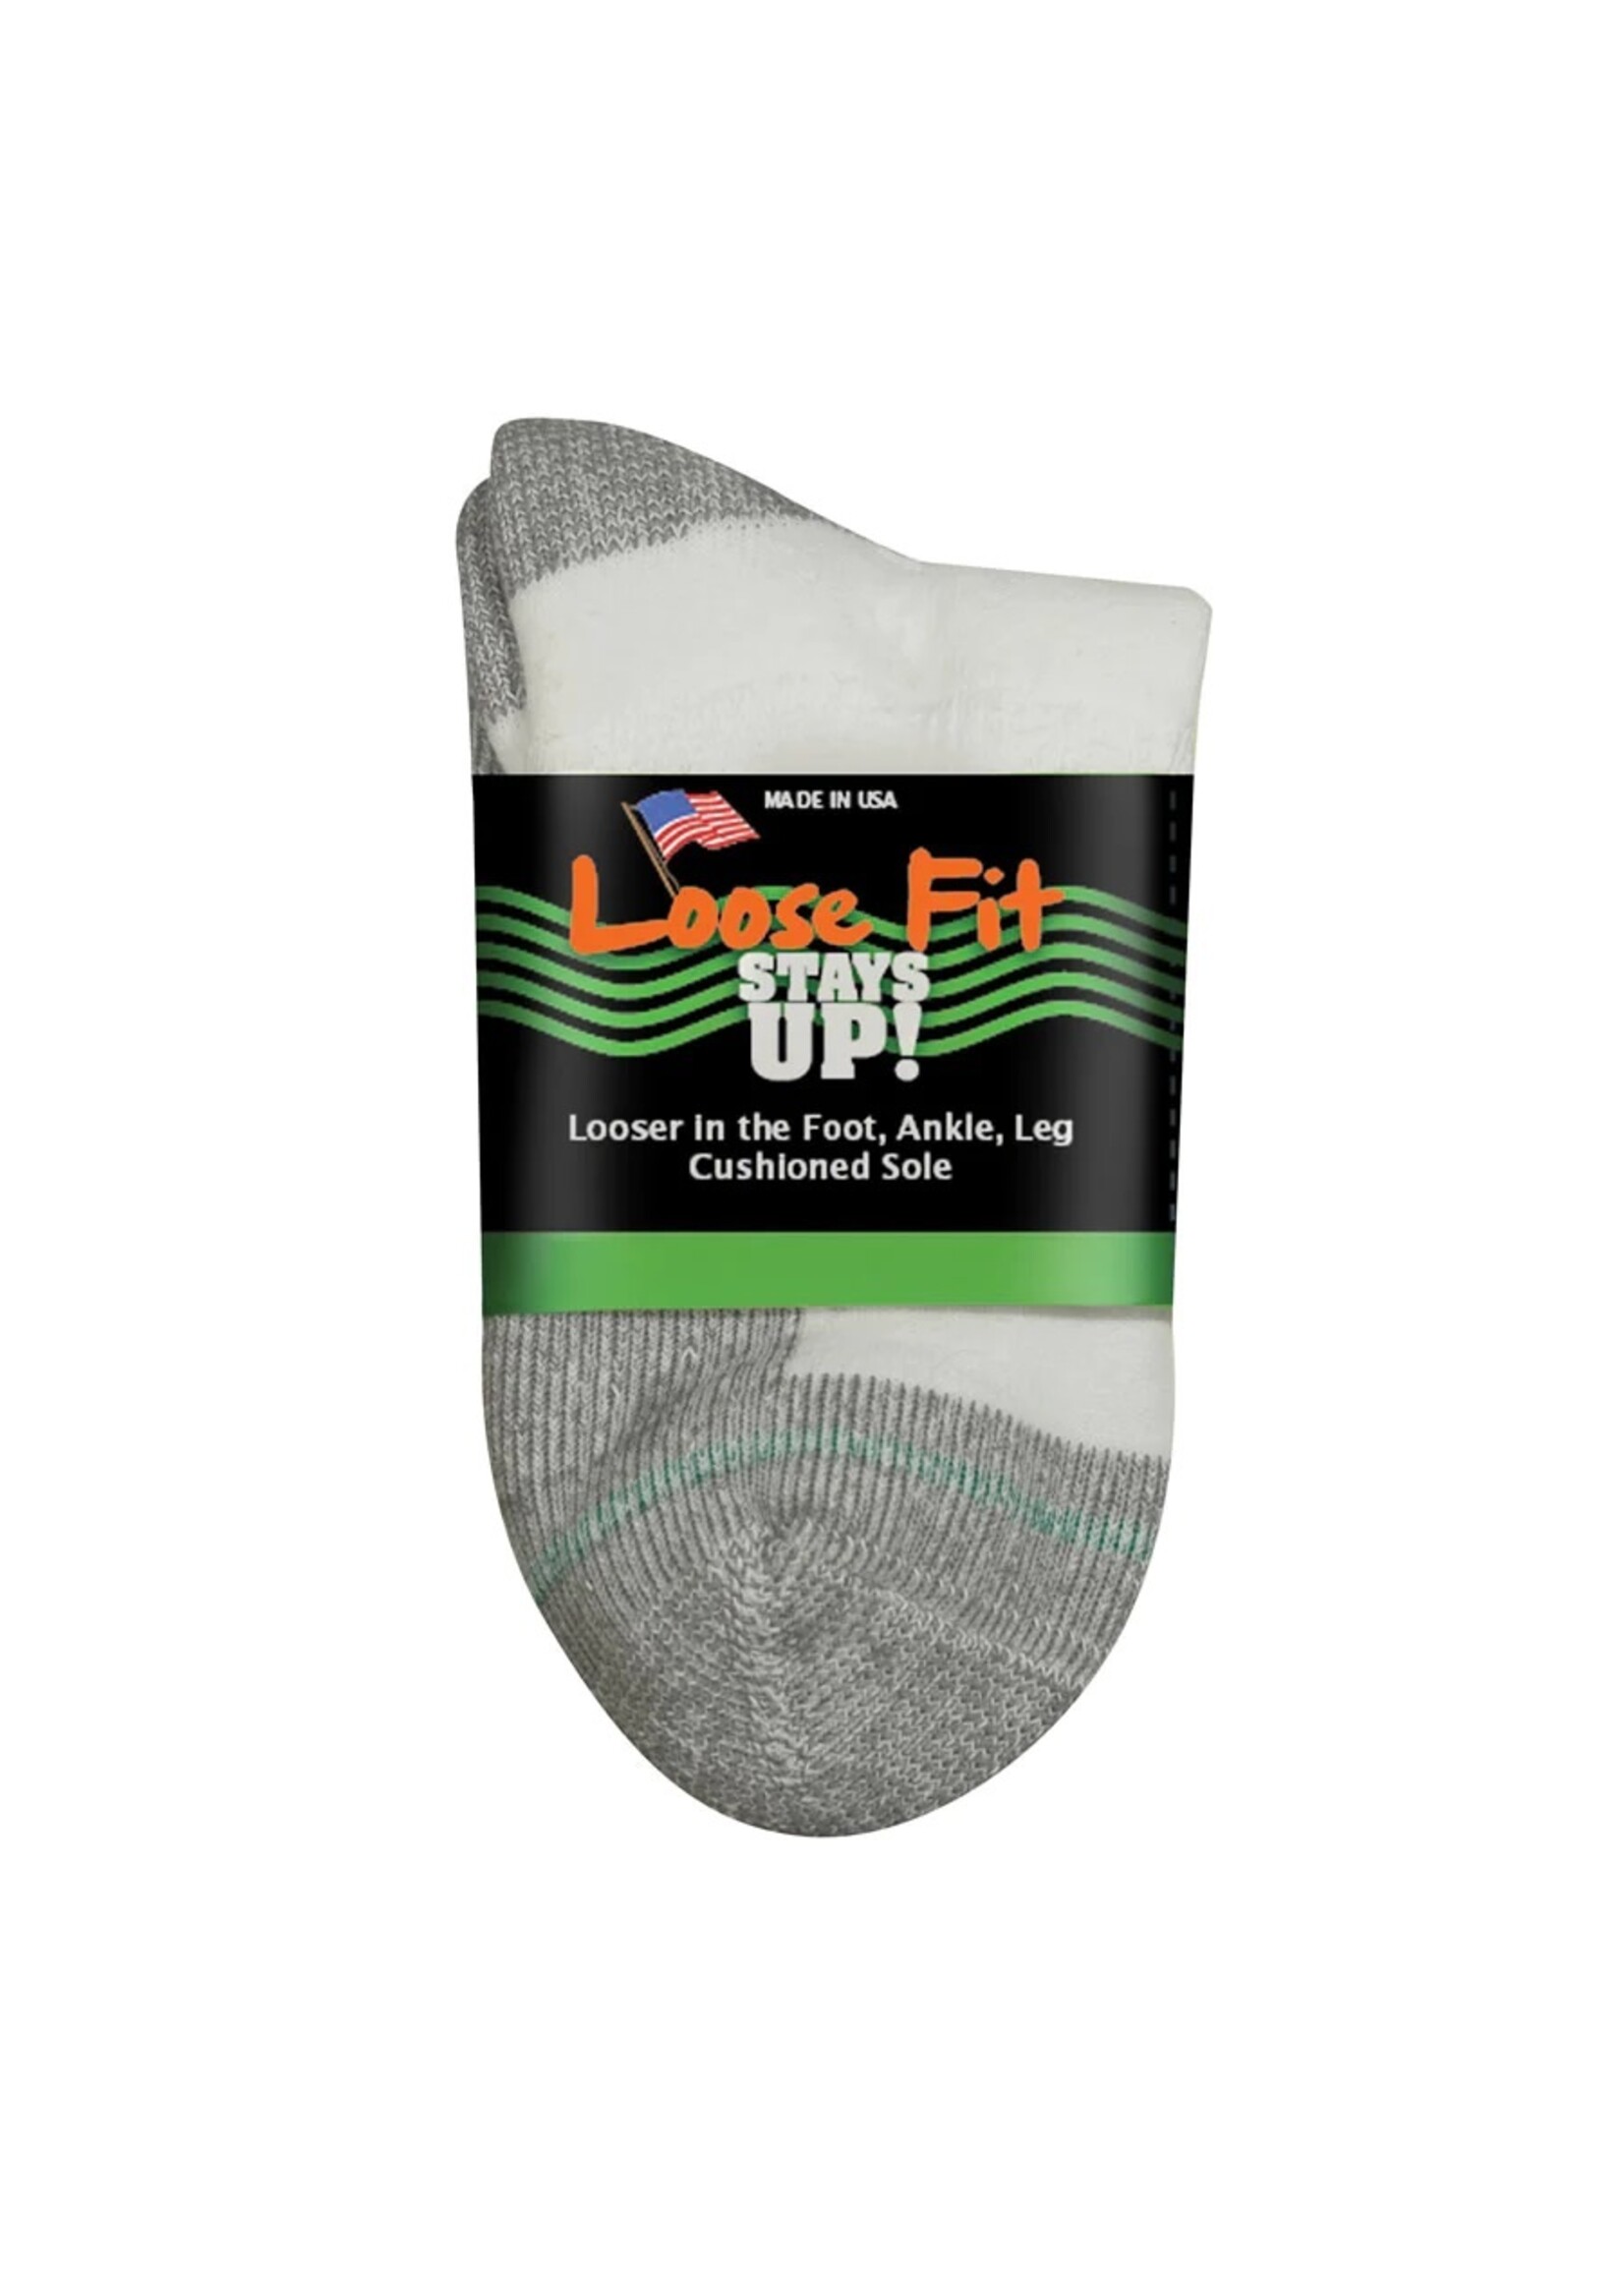 Extra Wide Sock Company Loose Fit Stays Up Extra Large Crew Sock White #720